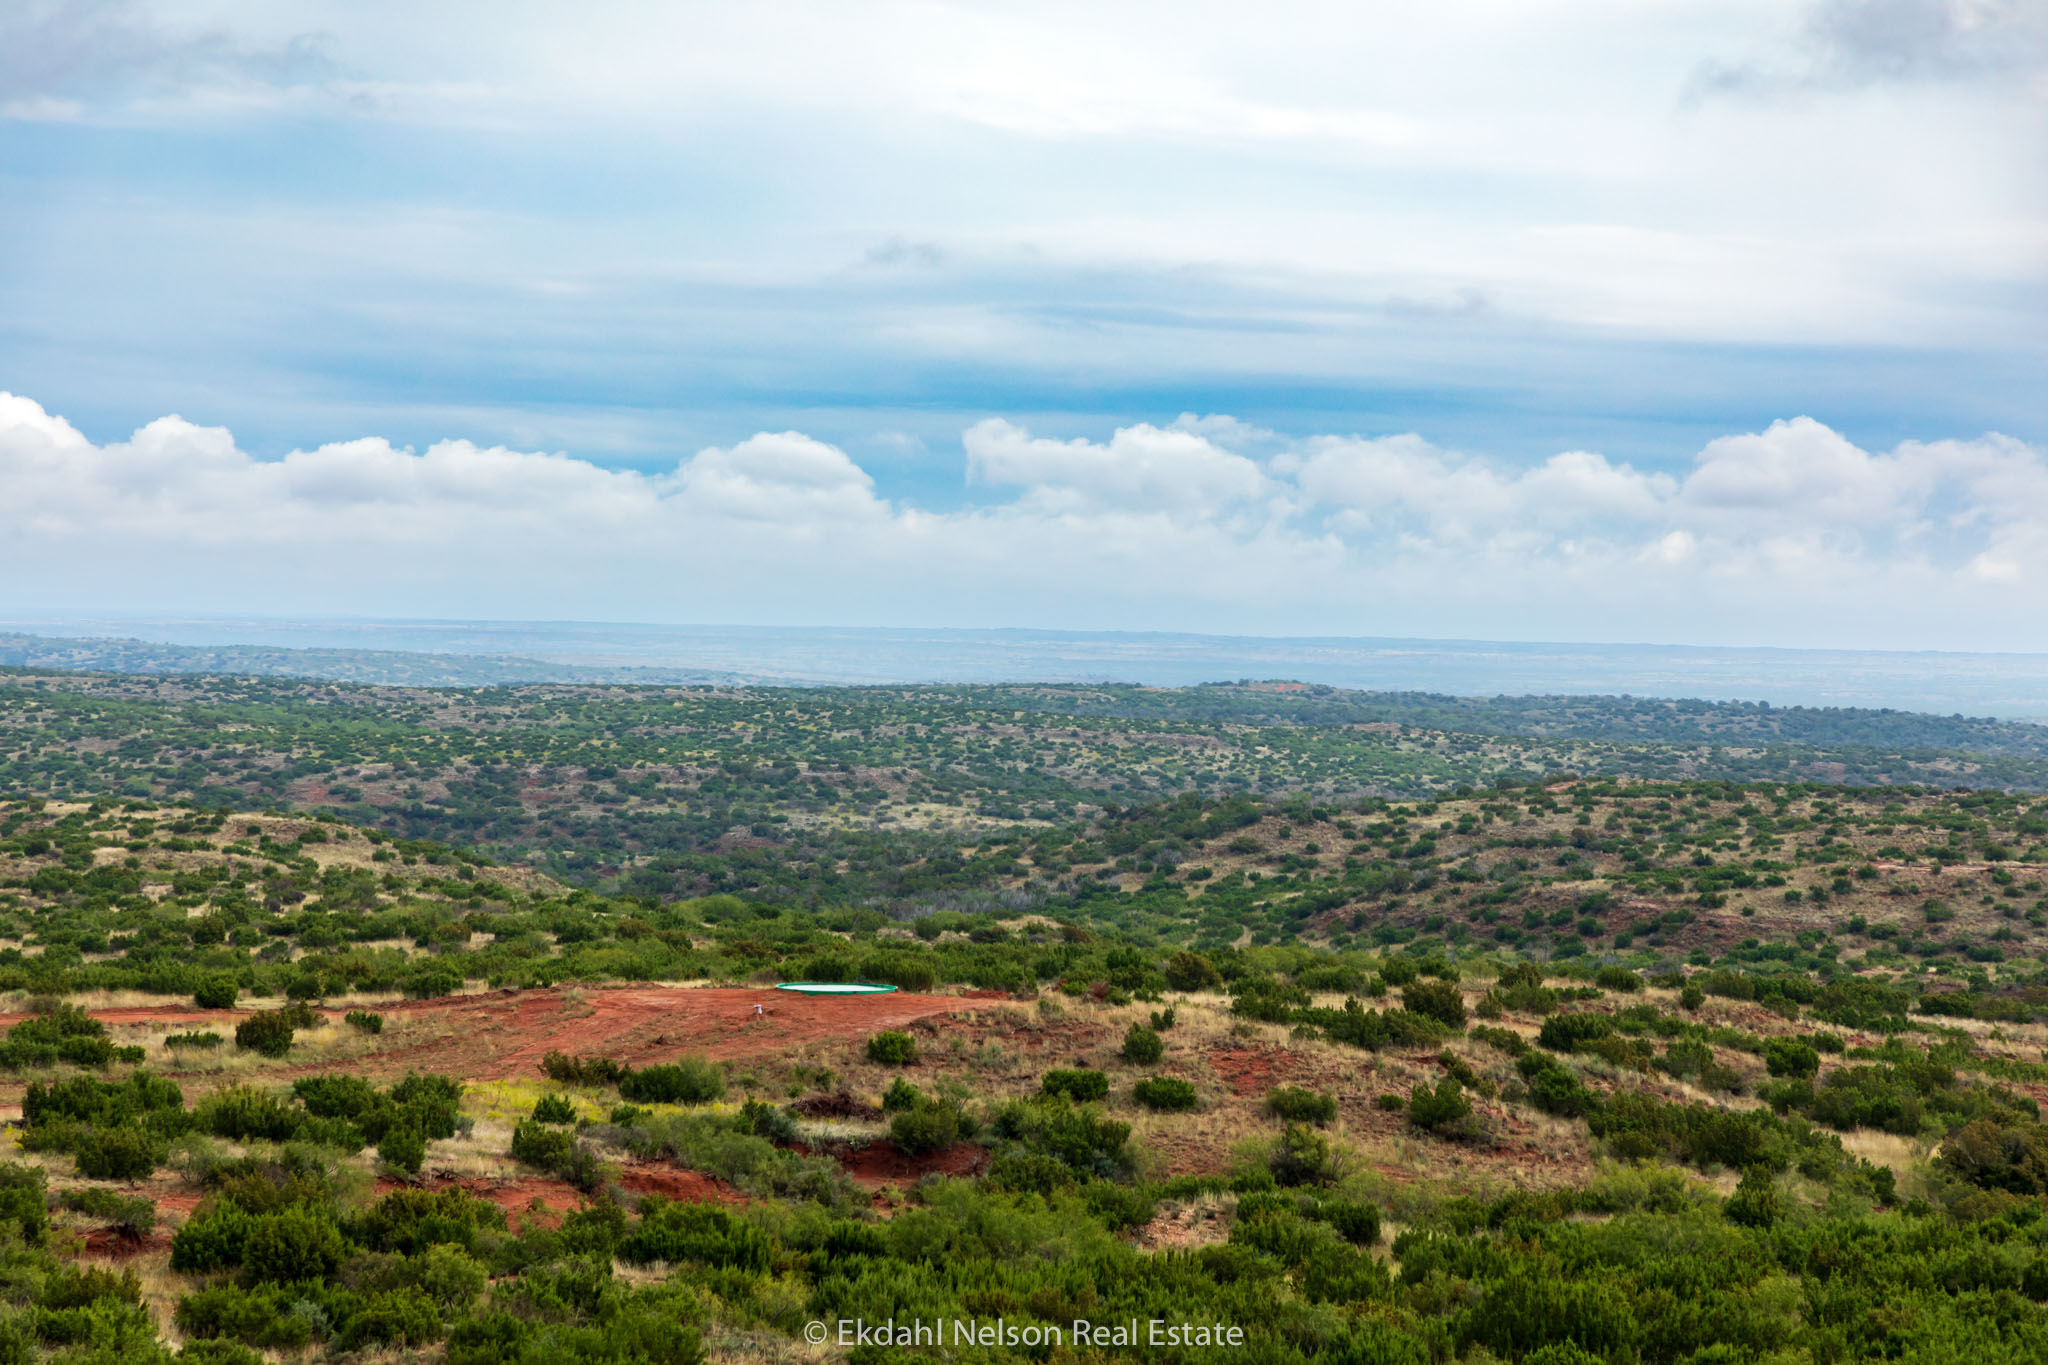 Image of red bluff canyon to convey what to look for in Hunting Ranches for Sale in Texas - Ekdahl Nelson Real Estate